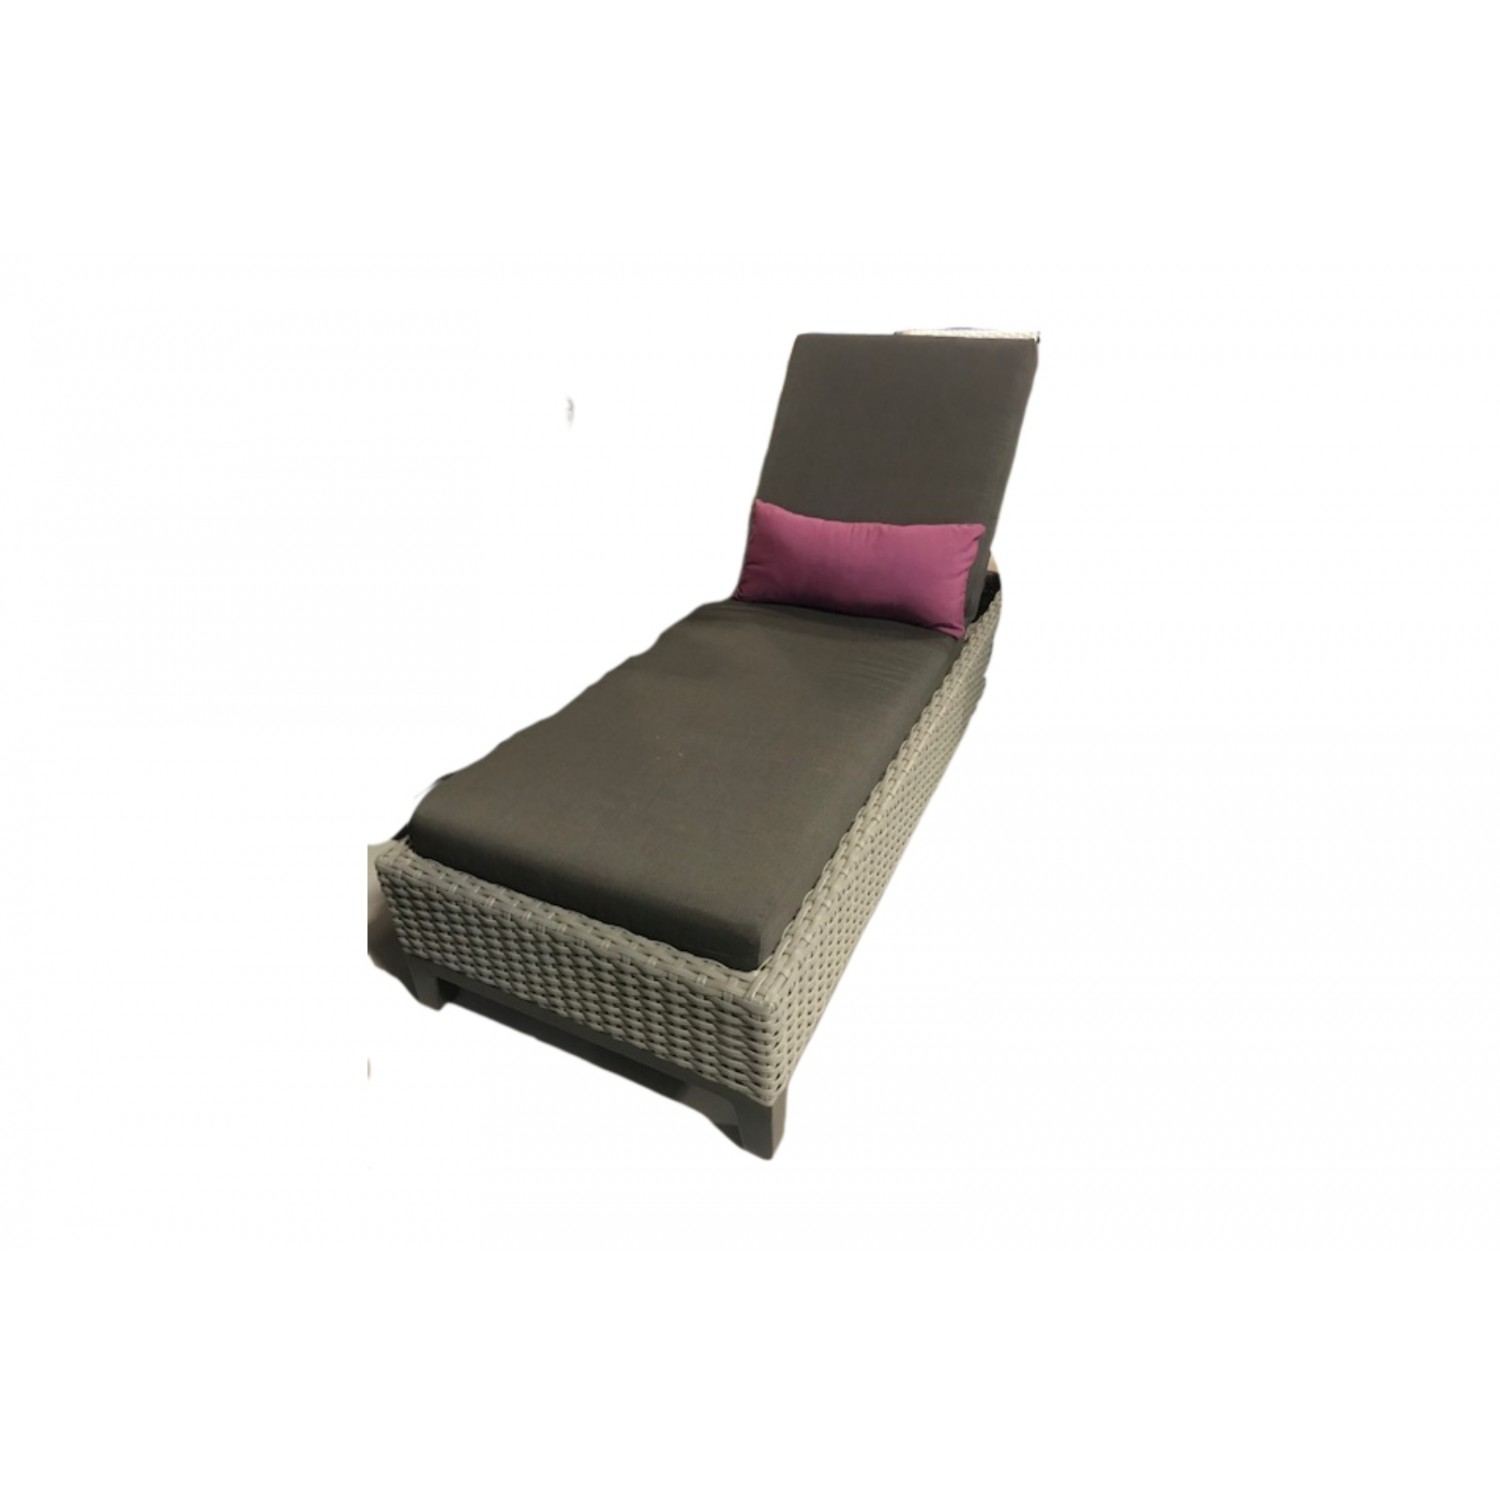 Tribeca Outdoor Chaise Lounger